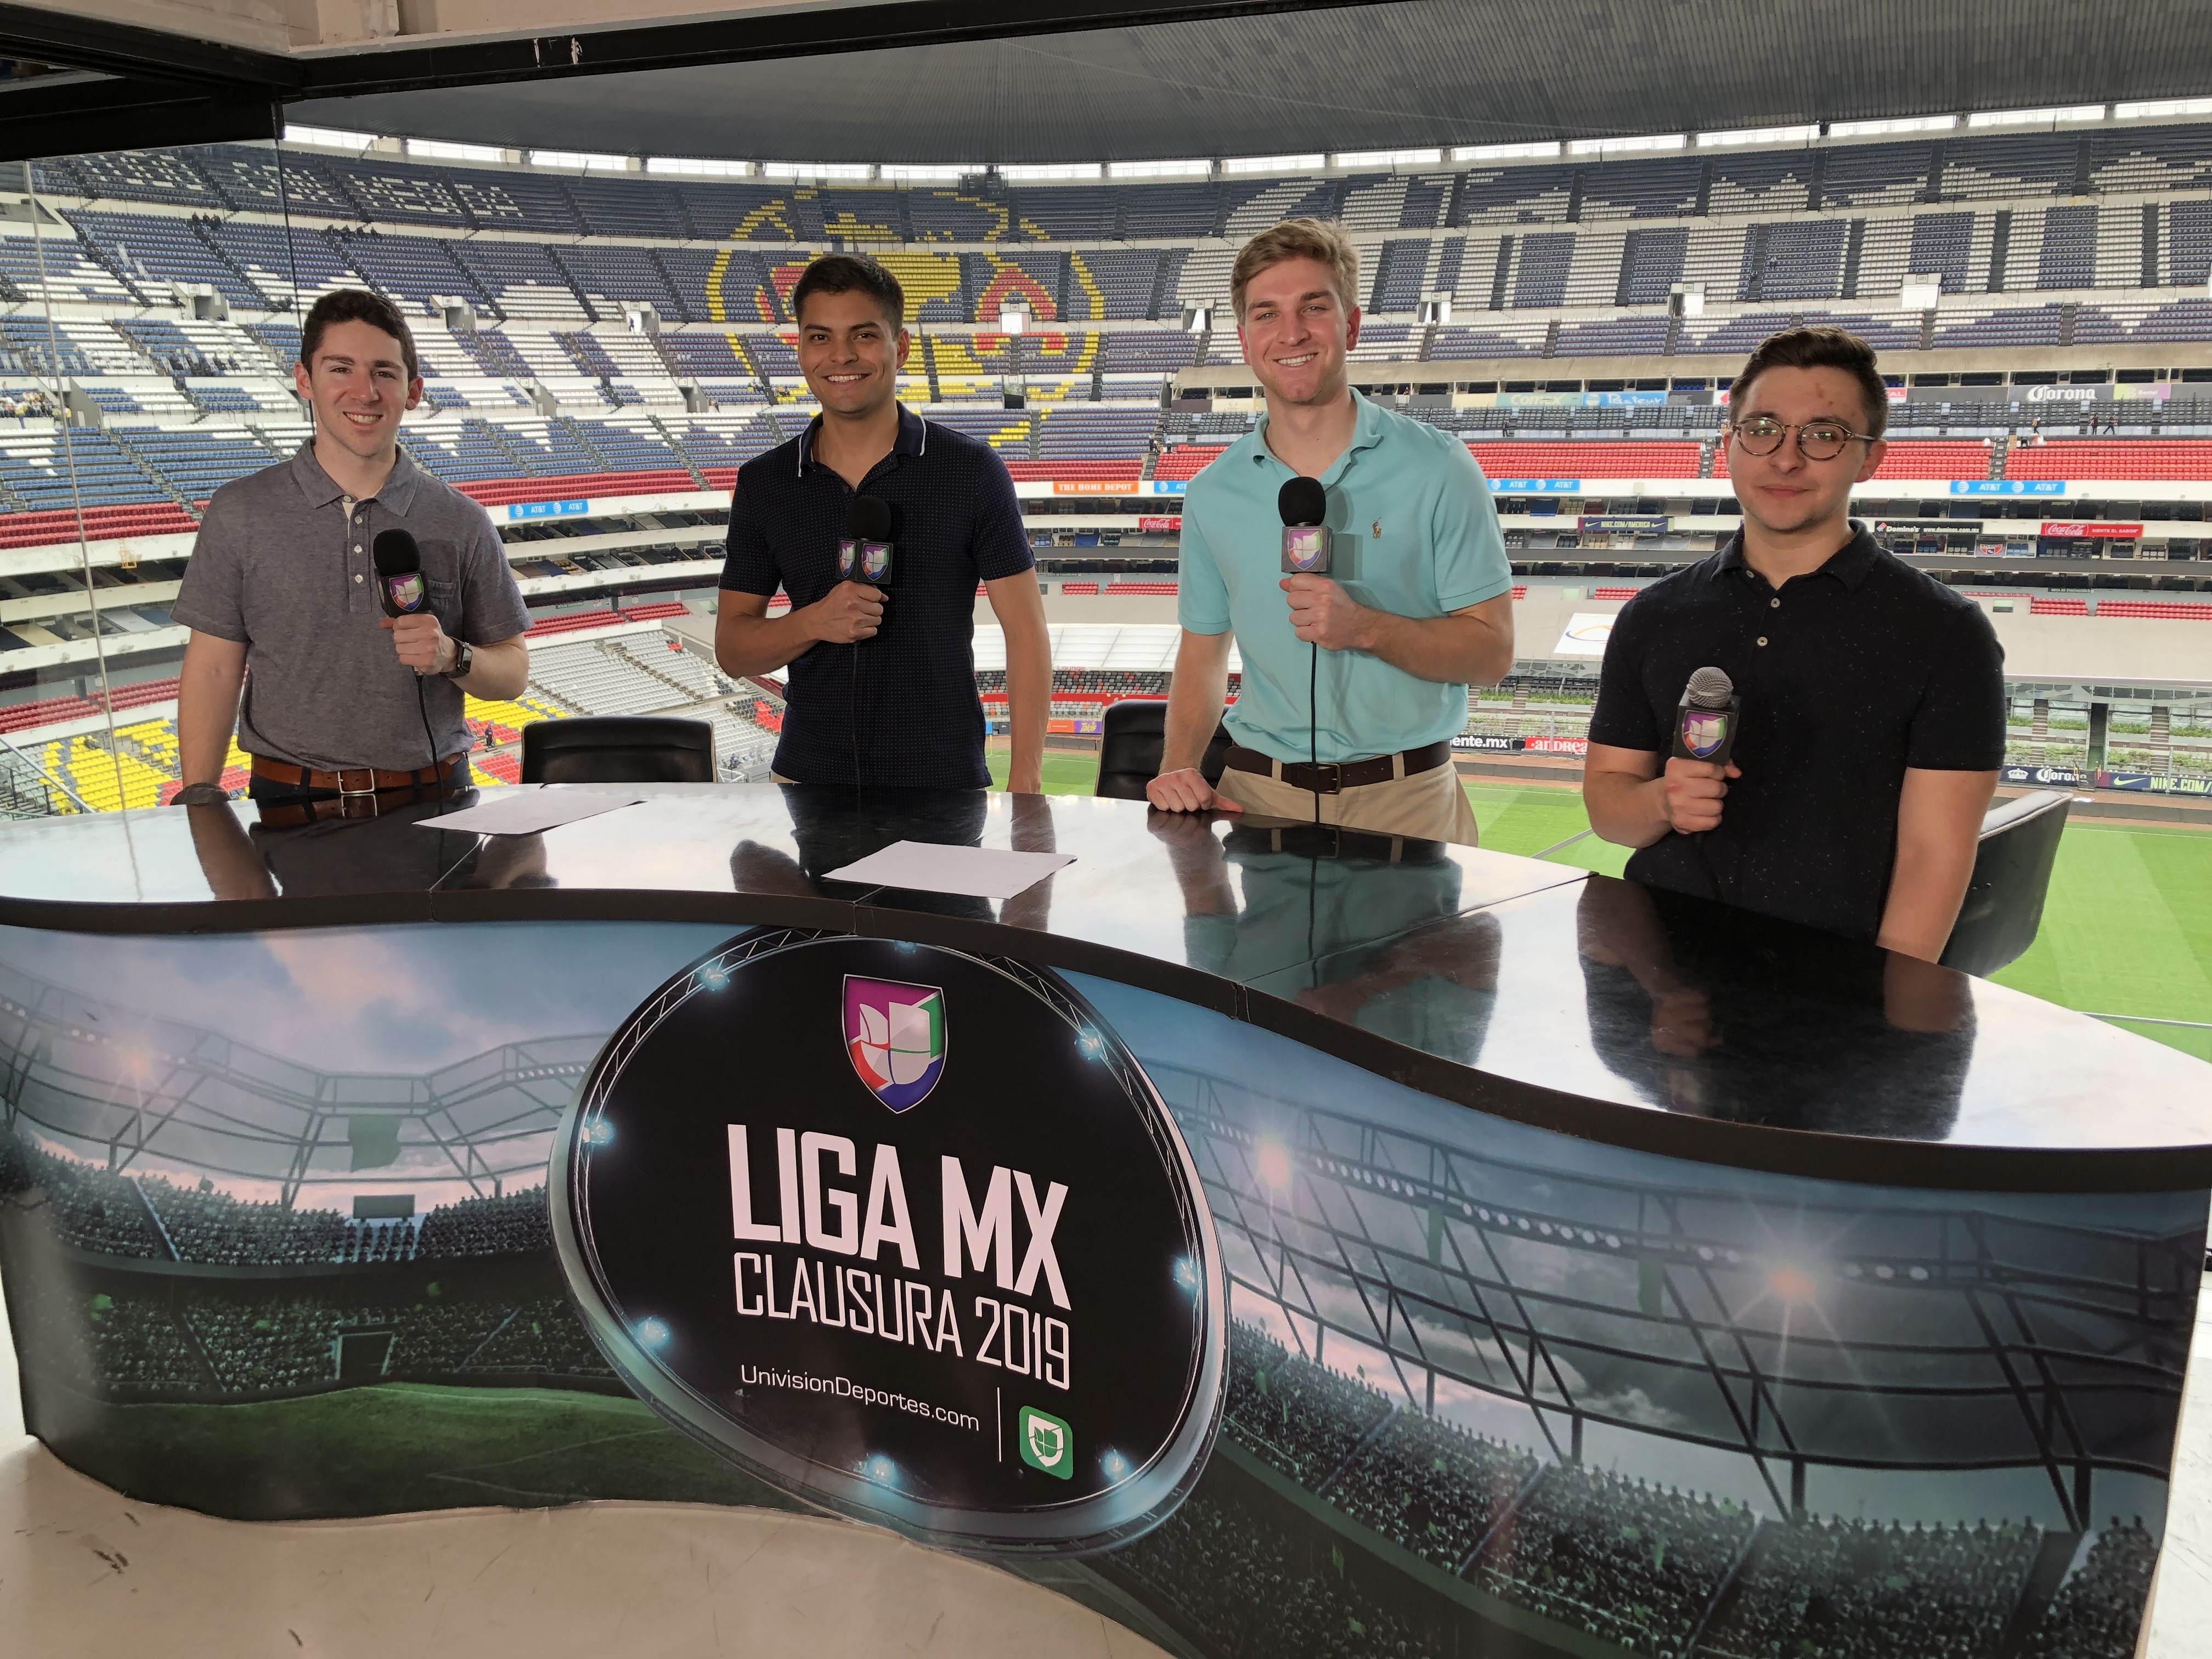 Students hold microphones to broadcast from a soccer stadium in Mexico.